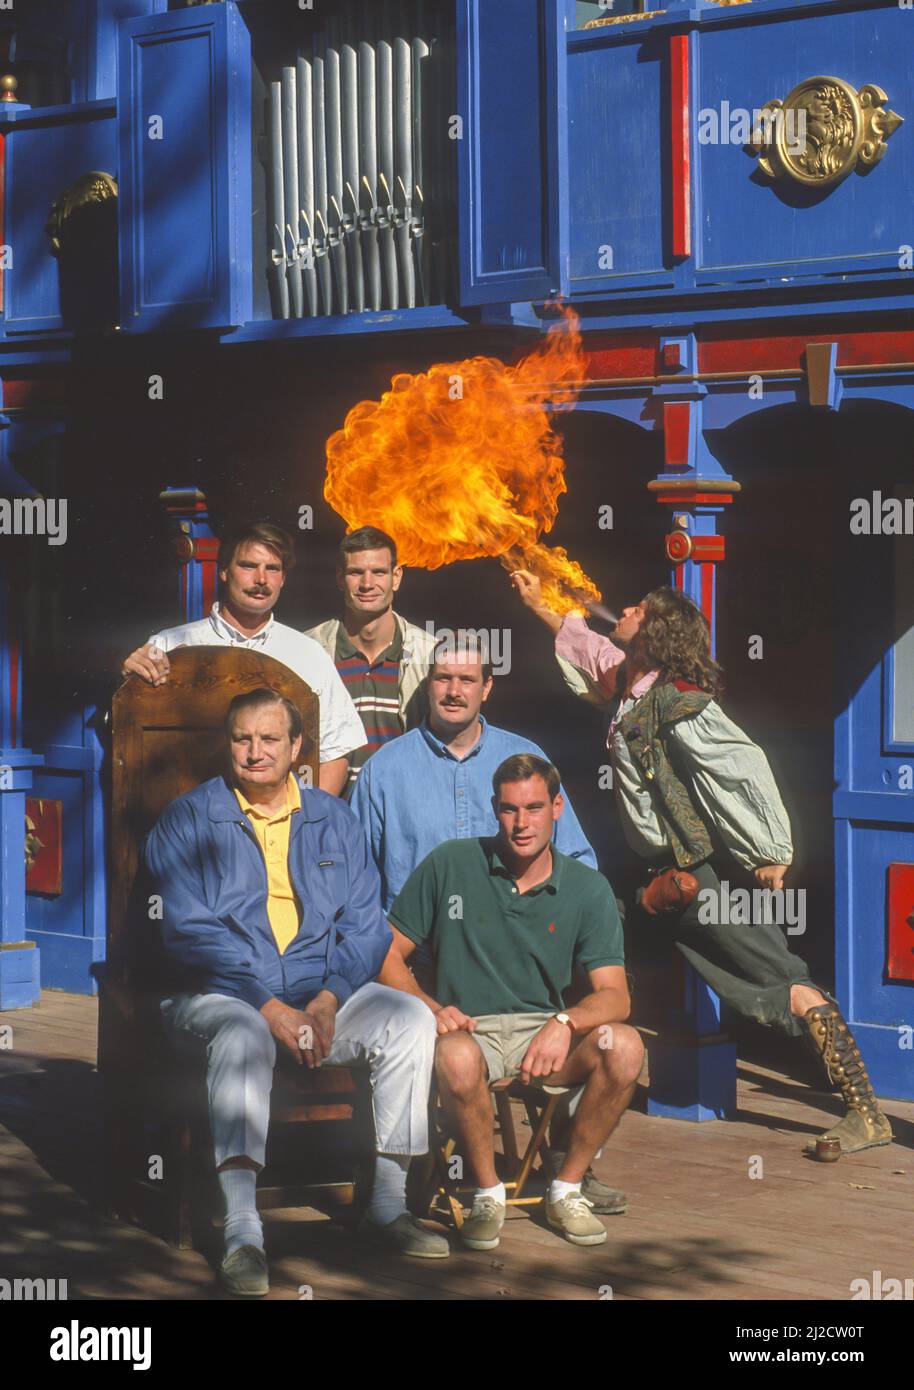 CROWNSVILLE, MARYLAND, USA - Maryland Renaissance Festival owners Smith family, and fire breathing actor, October 1993. Stock Photo